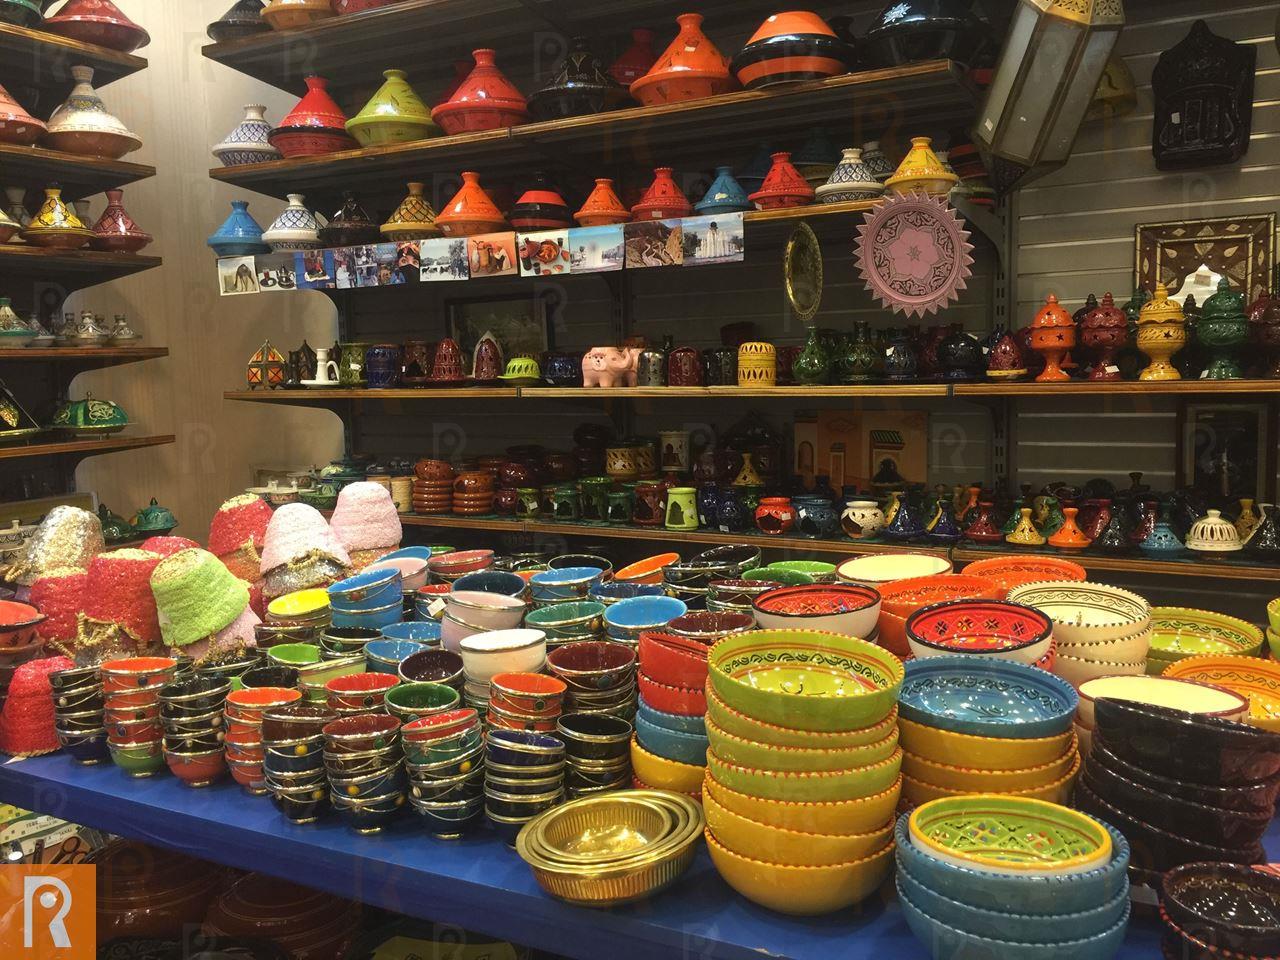 Moroccan products in True Value Store